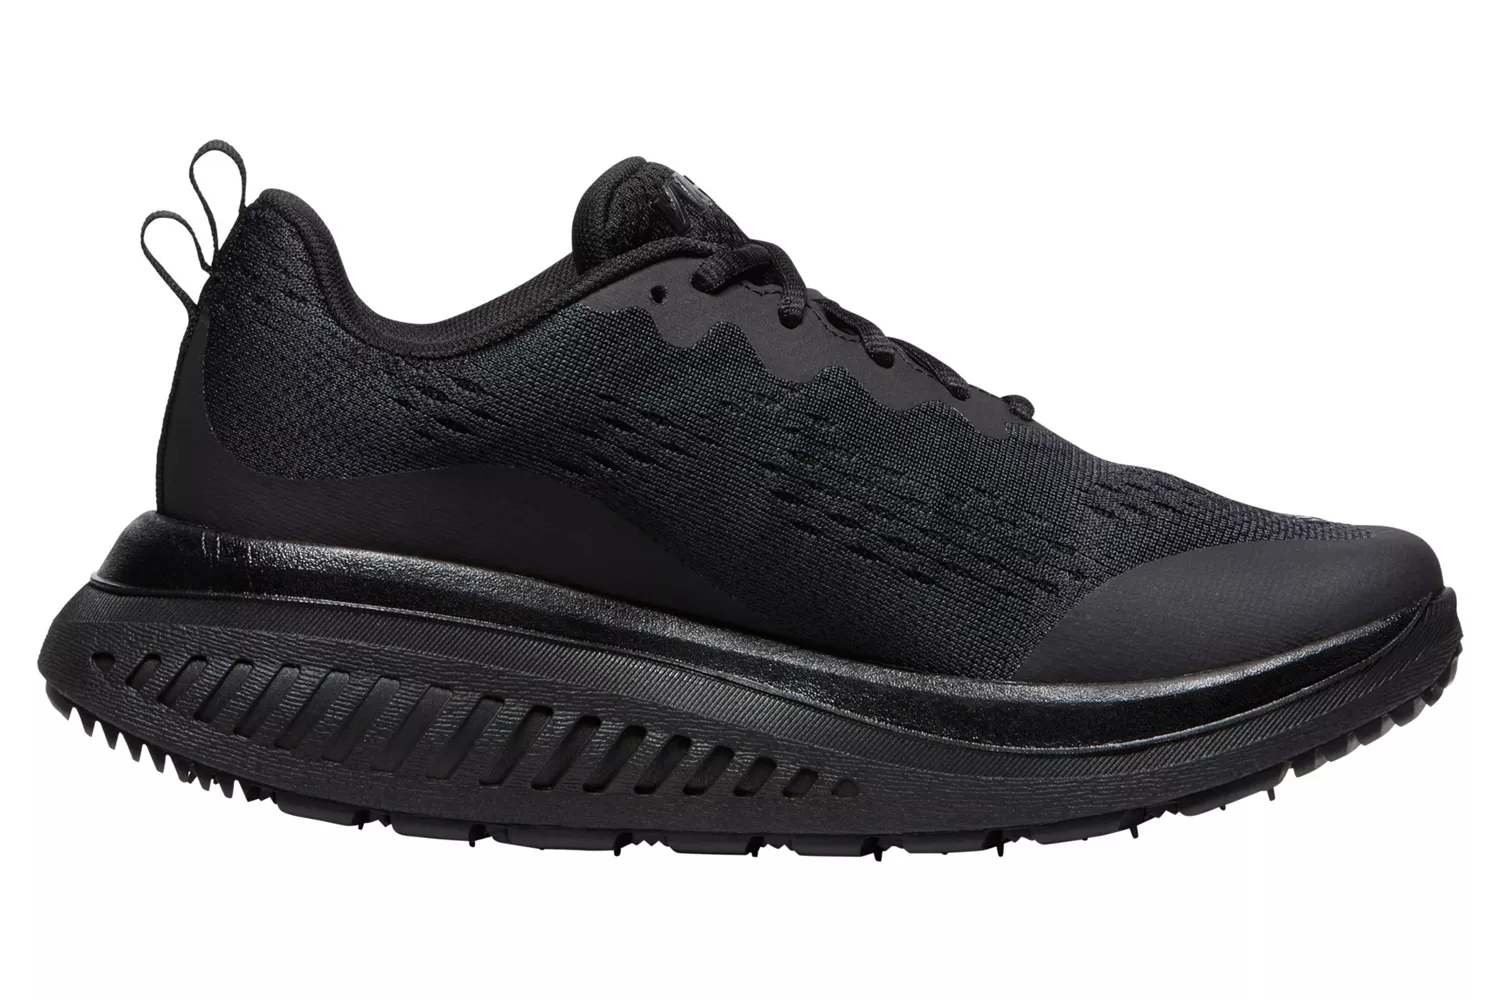 The Most Comfortable Shoes for Walking: KEEN WK400 Walking Shoes